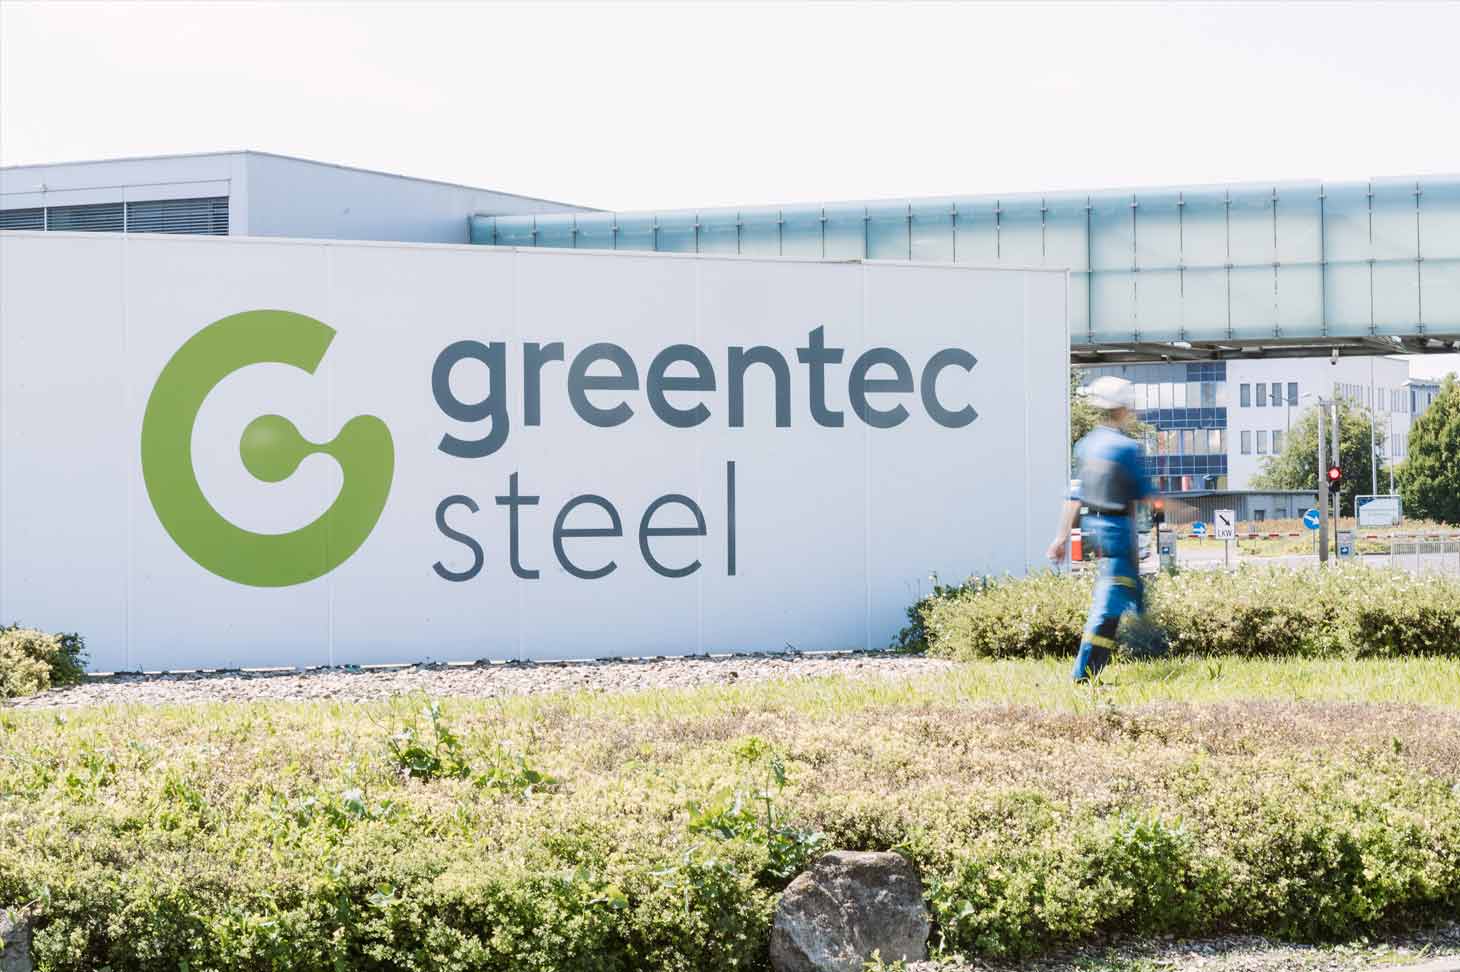 Sign greentec steel, in front of it an employee